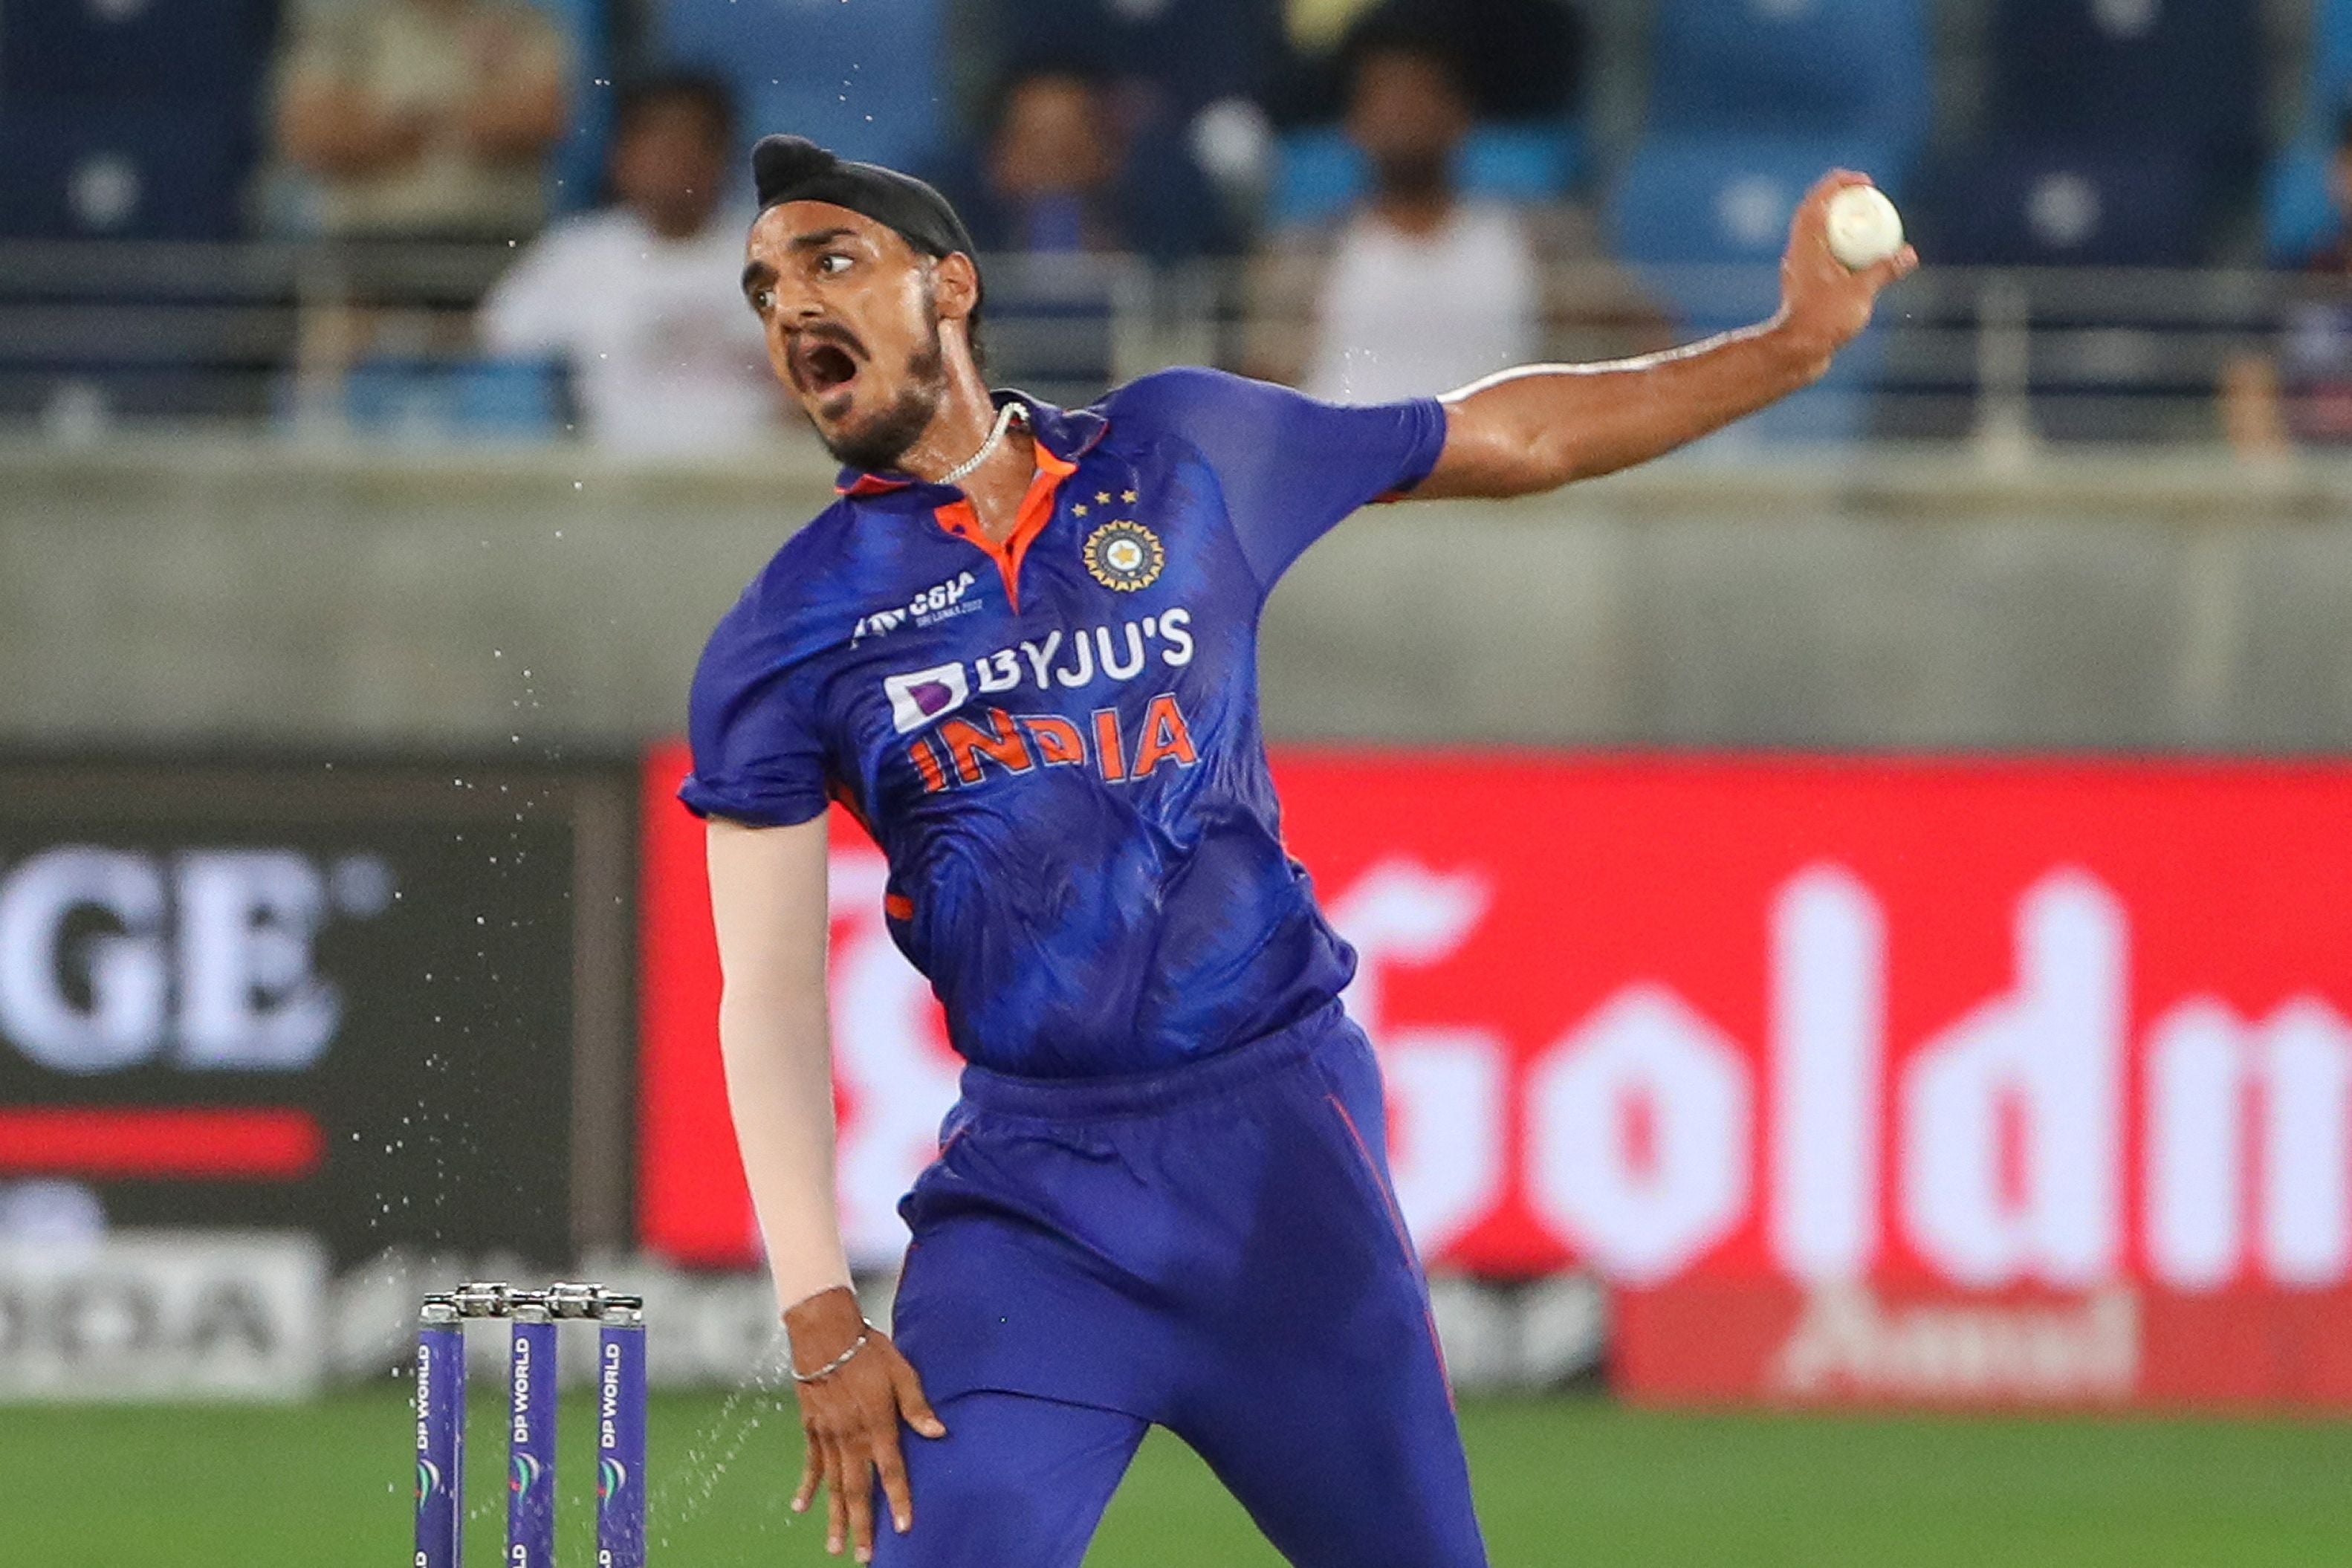 India’s Arshdeep Singh dropped a catch in the closing stages of a tense India-Pakistan match at the Asia Cup in Dubai